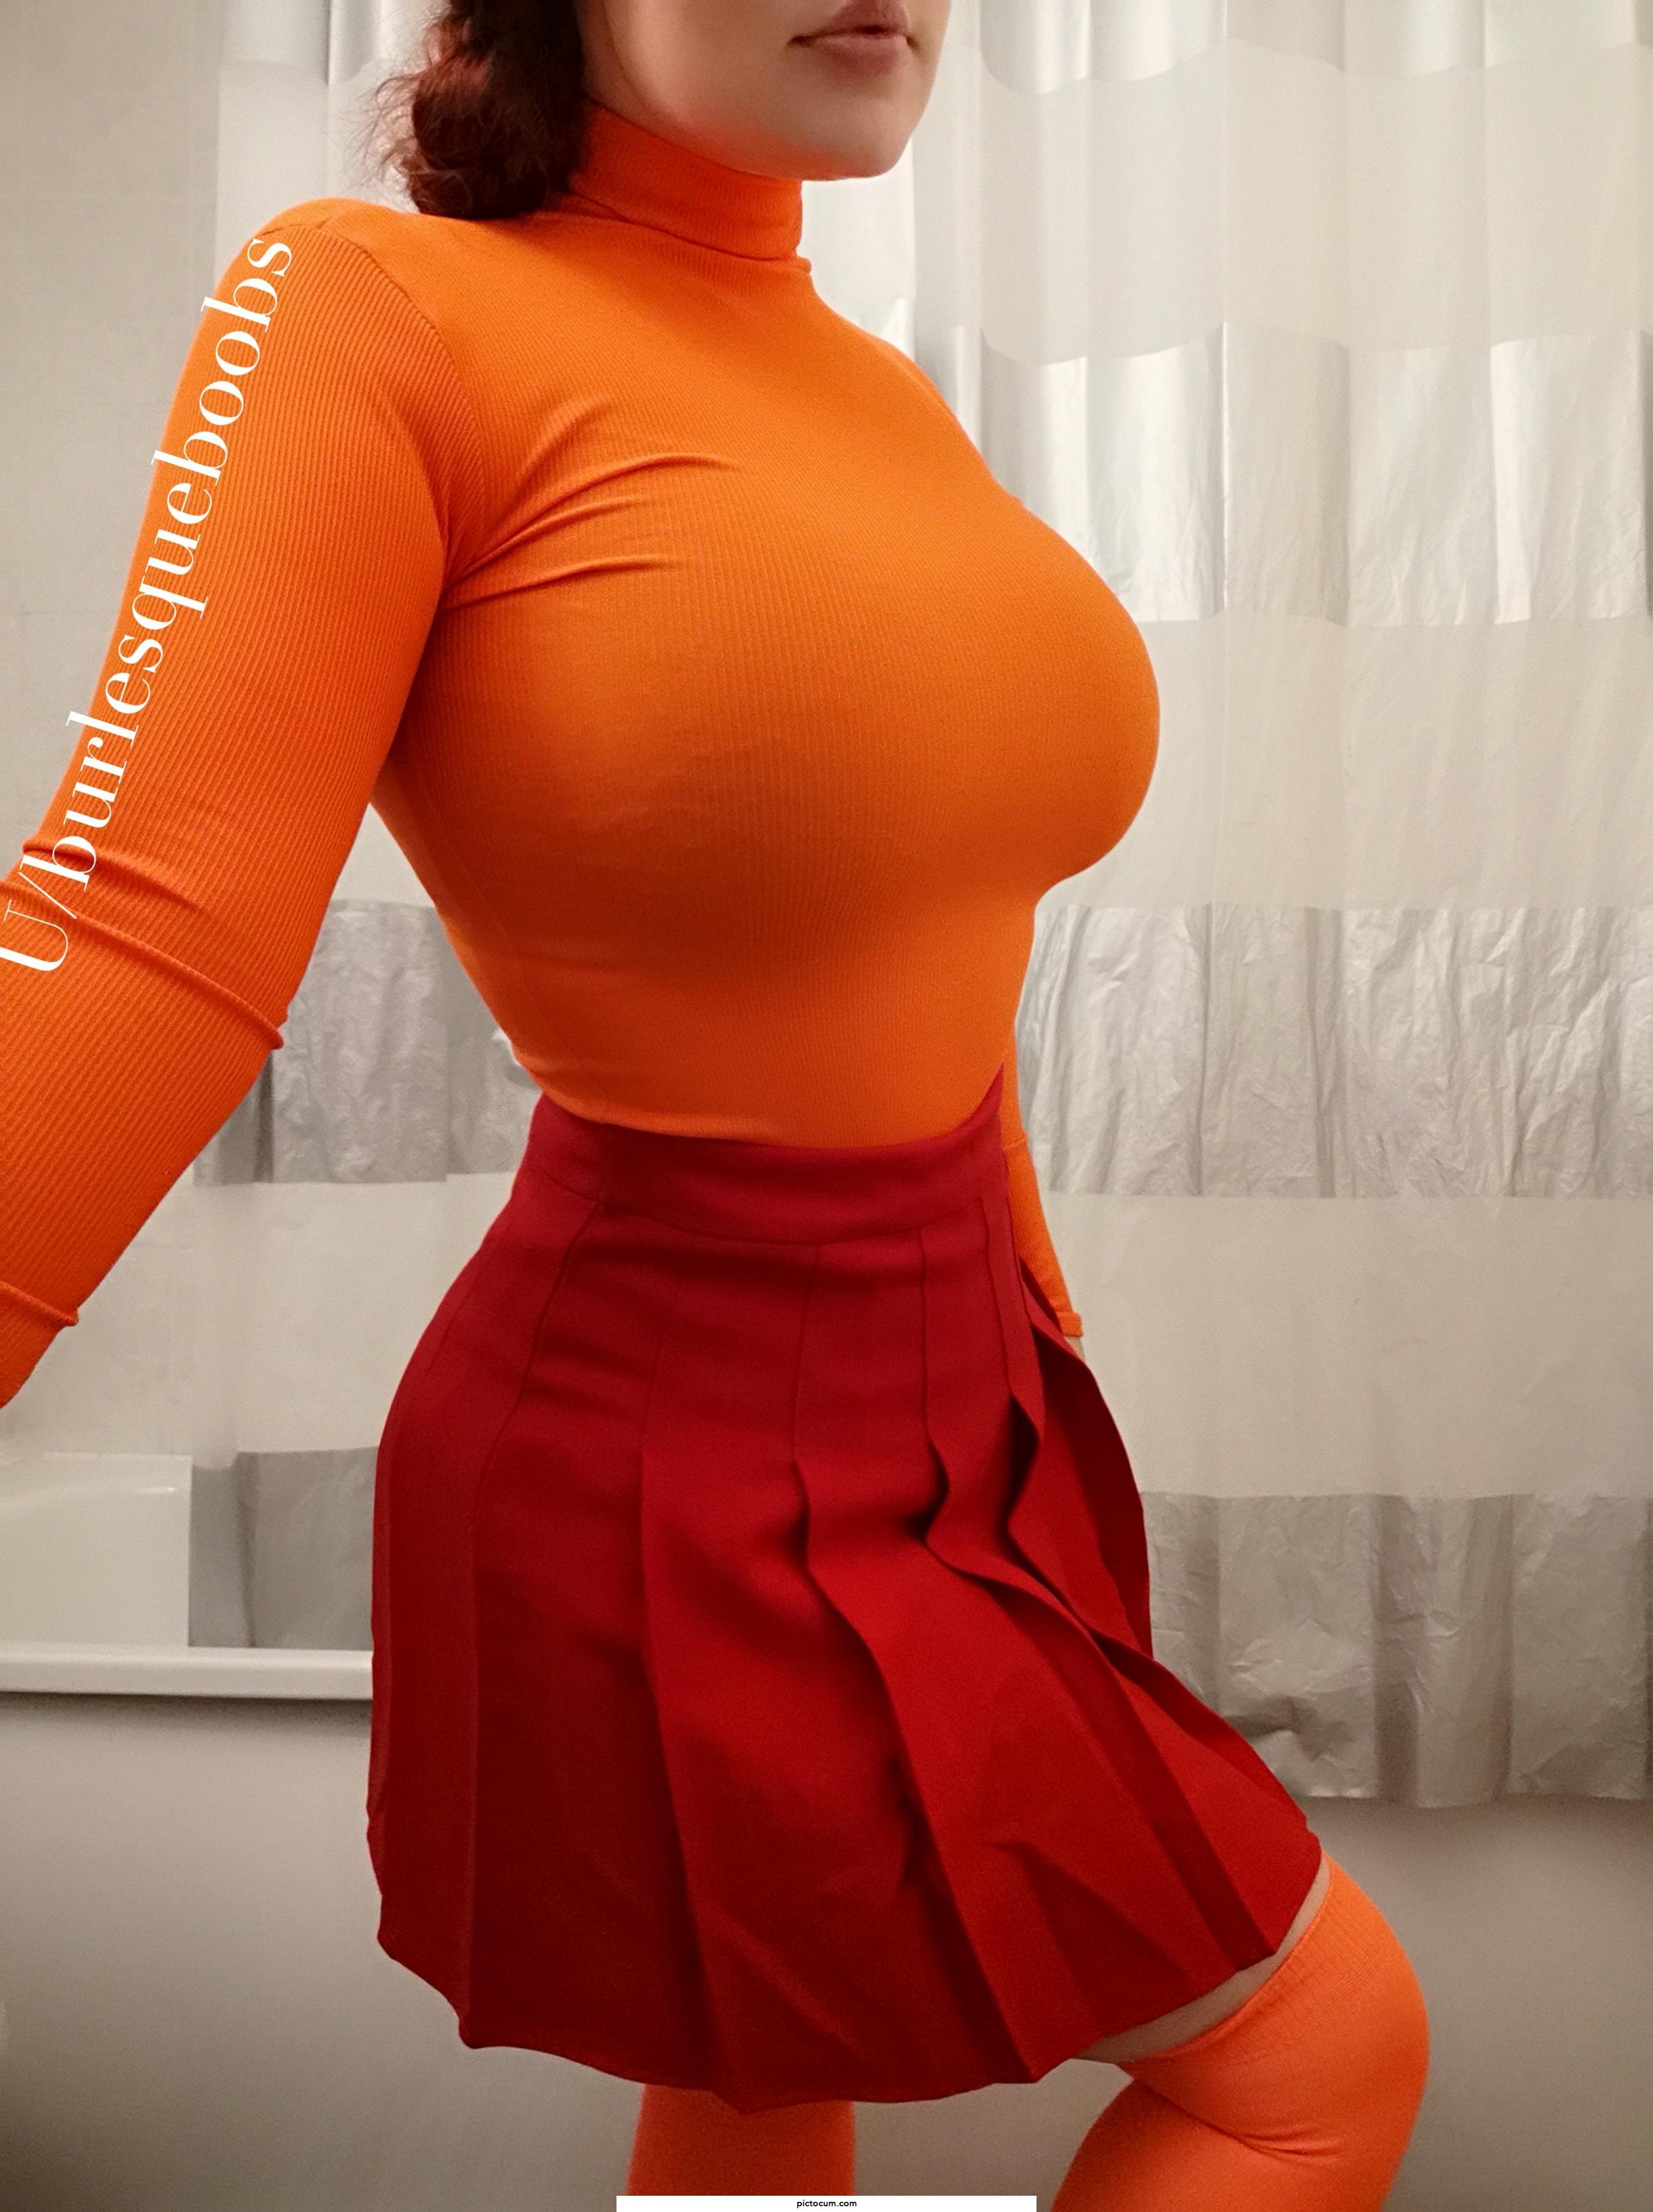 Milfs can play dress up too 🤓🧡❤️